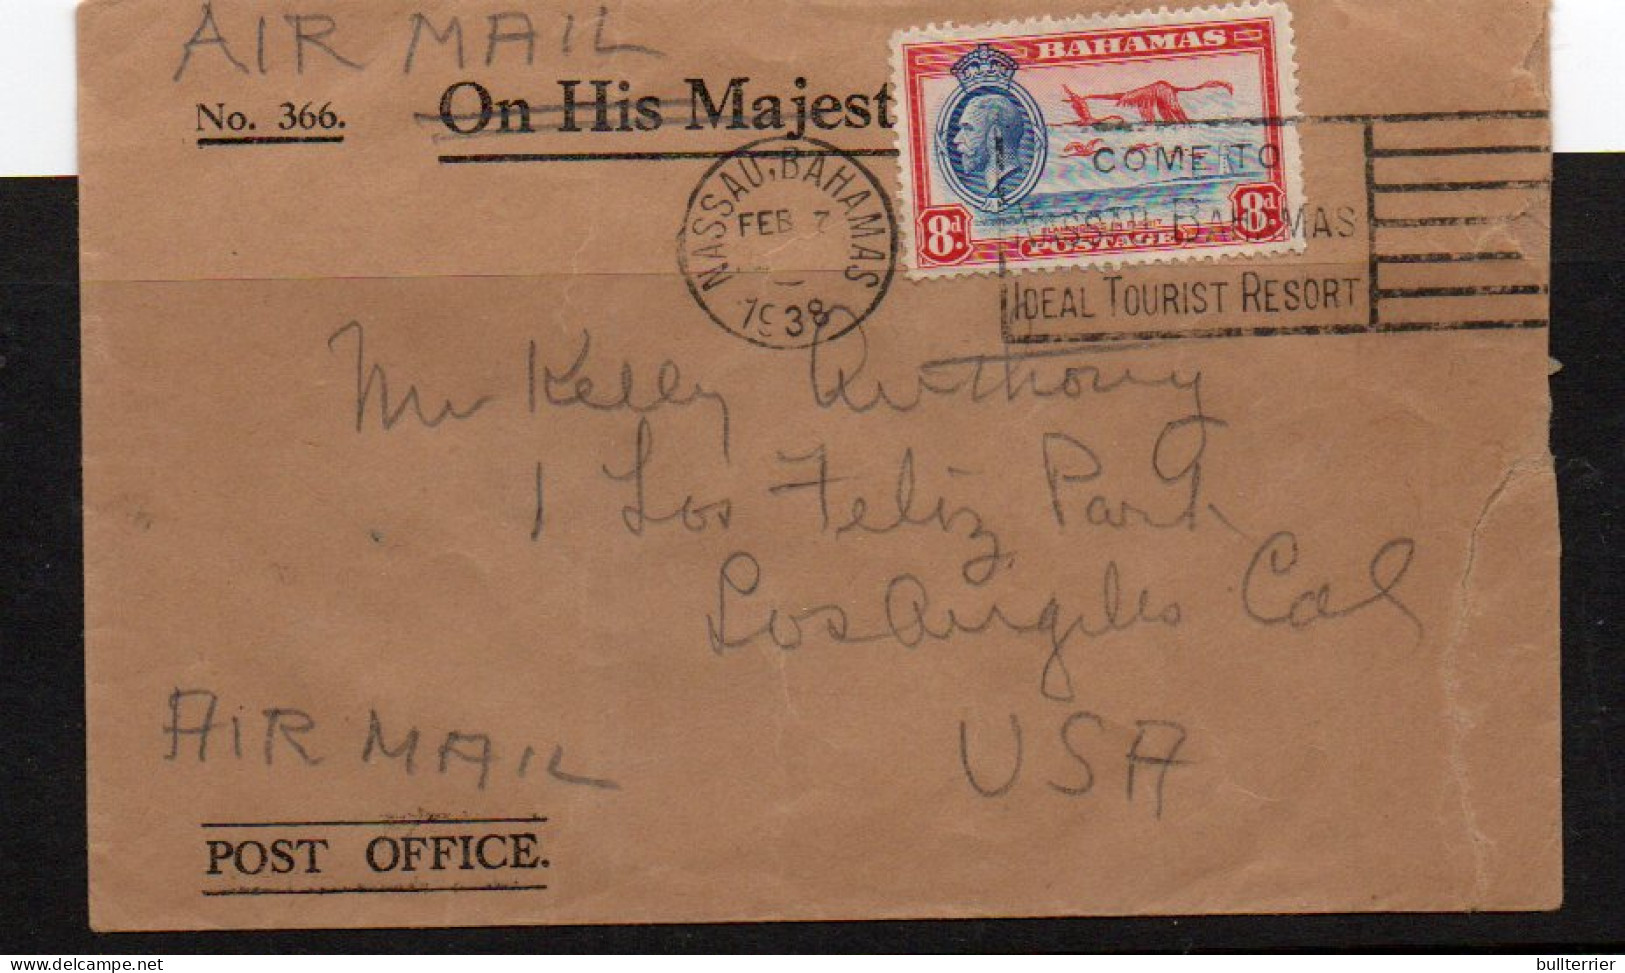 BAHAMAS - 1938 - AIRMAIL COVER TO LOS ANGLES FRANKED 8D FLAMINGO  - 1859-1963 Colonia Británica